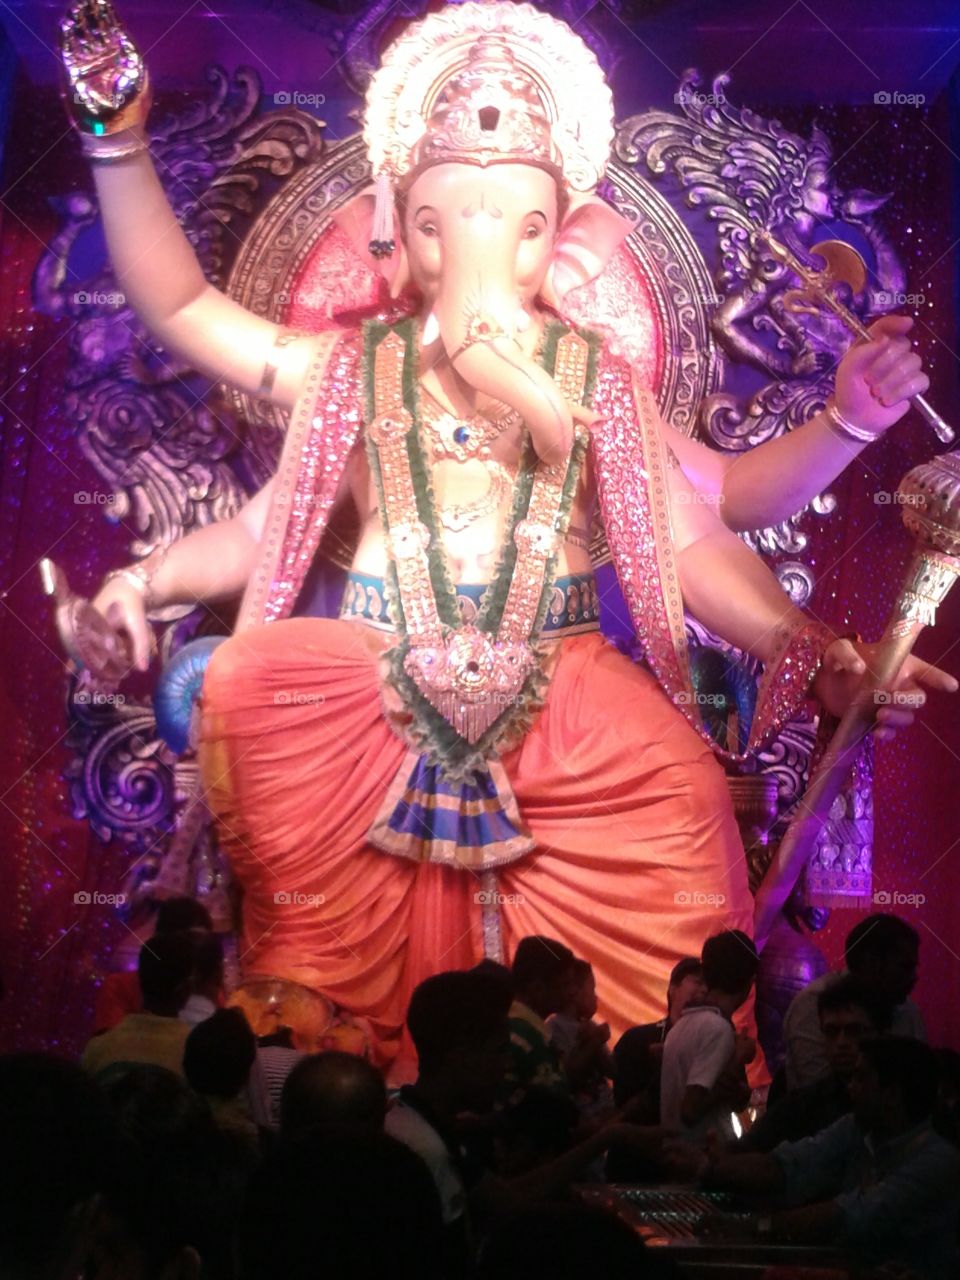 this is lord Shree Ganesha. son of Lord Mahadev. this festival is specially celebrate in Maharashtra, India.